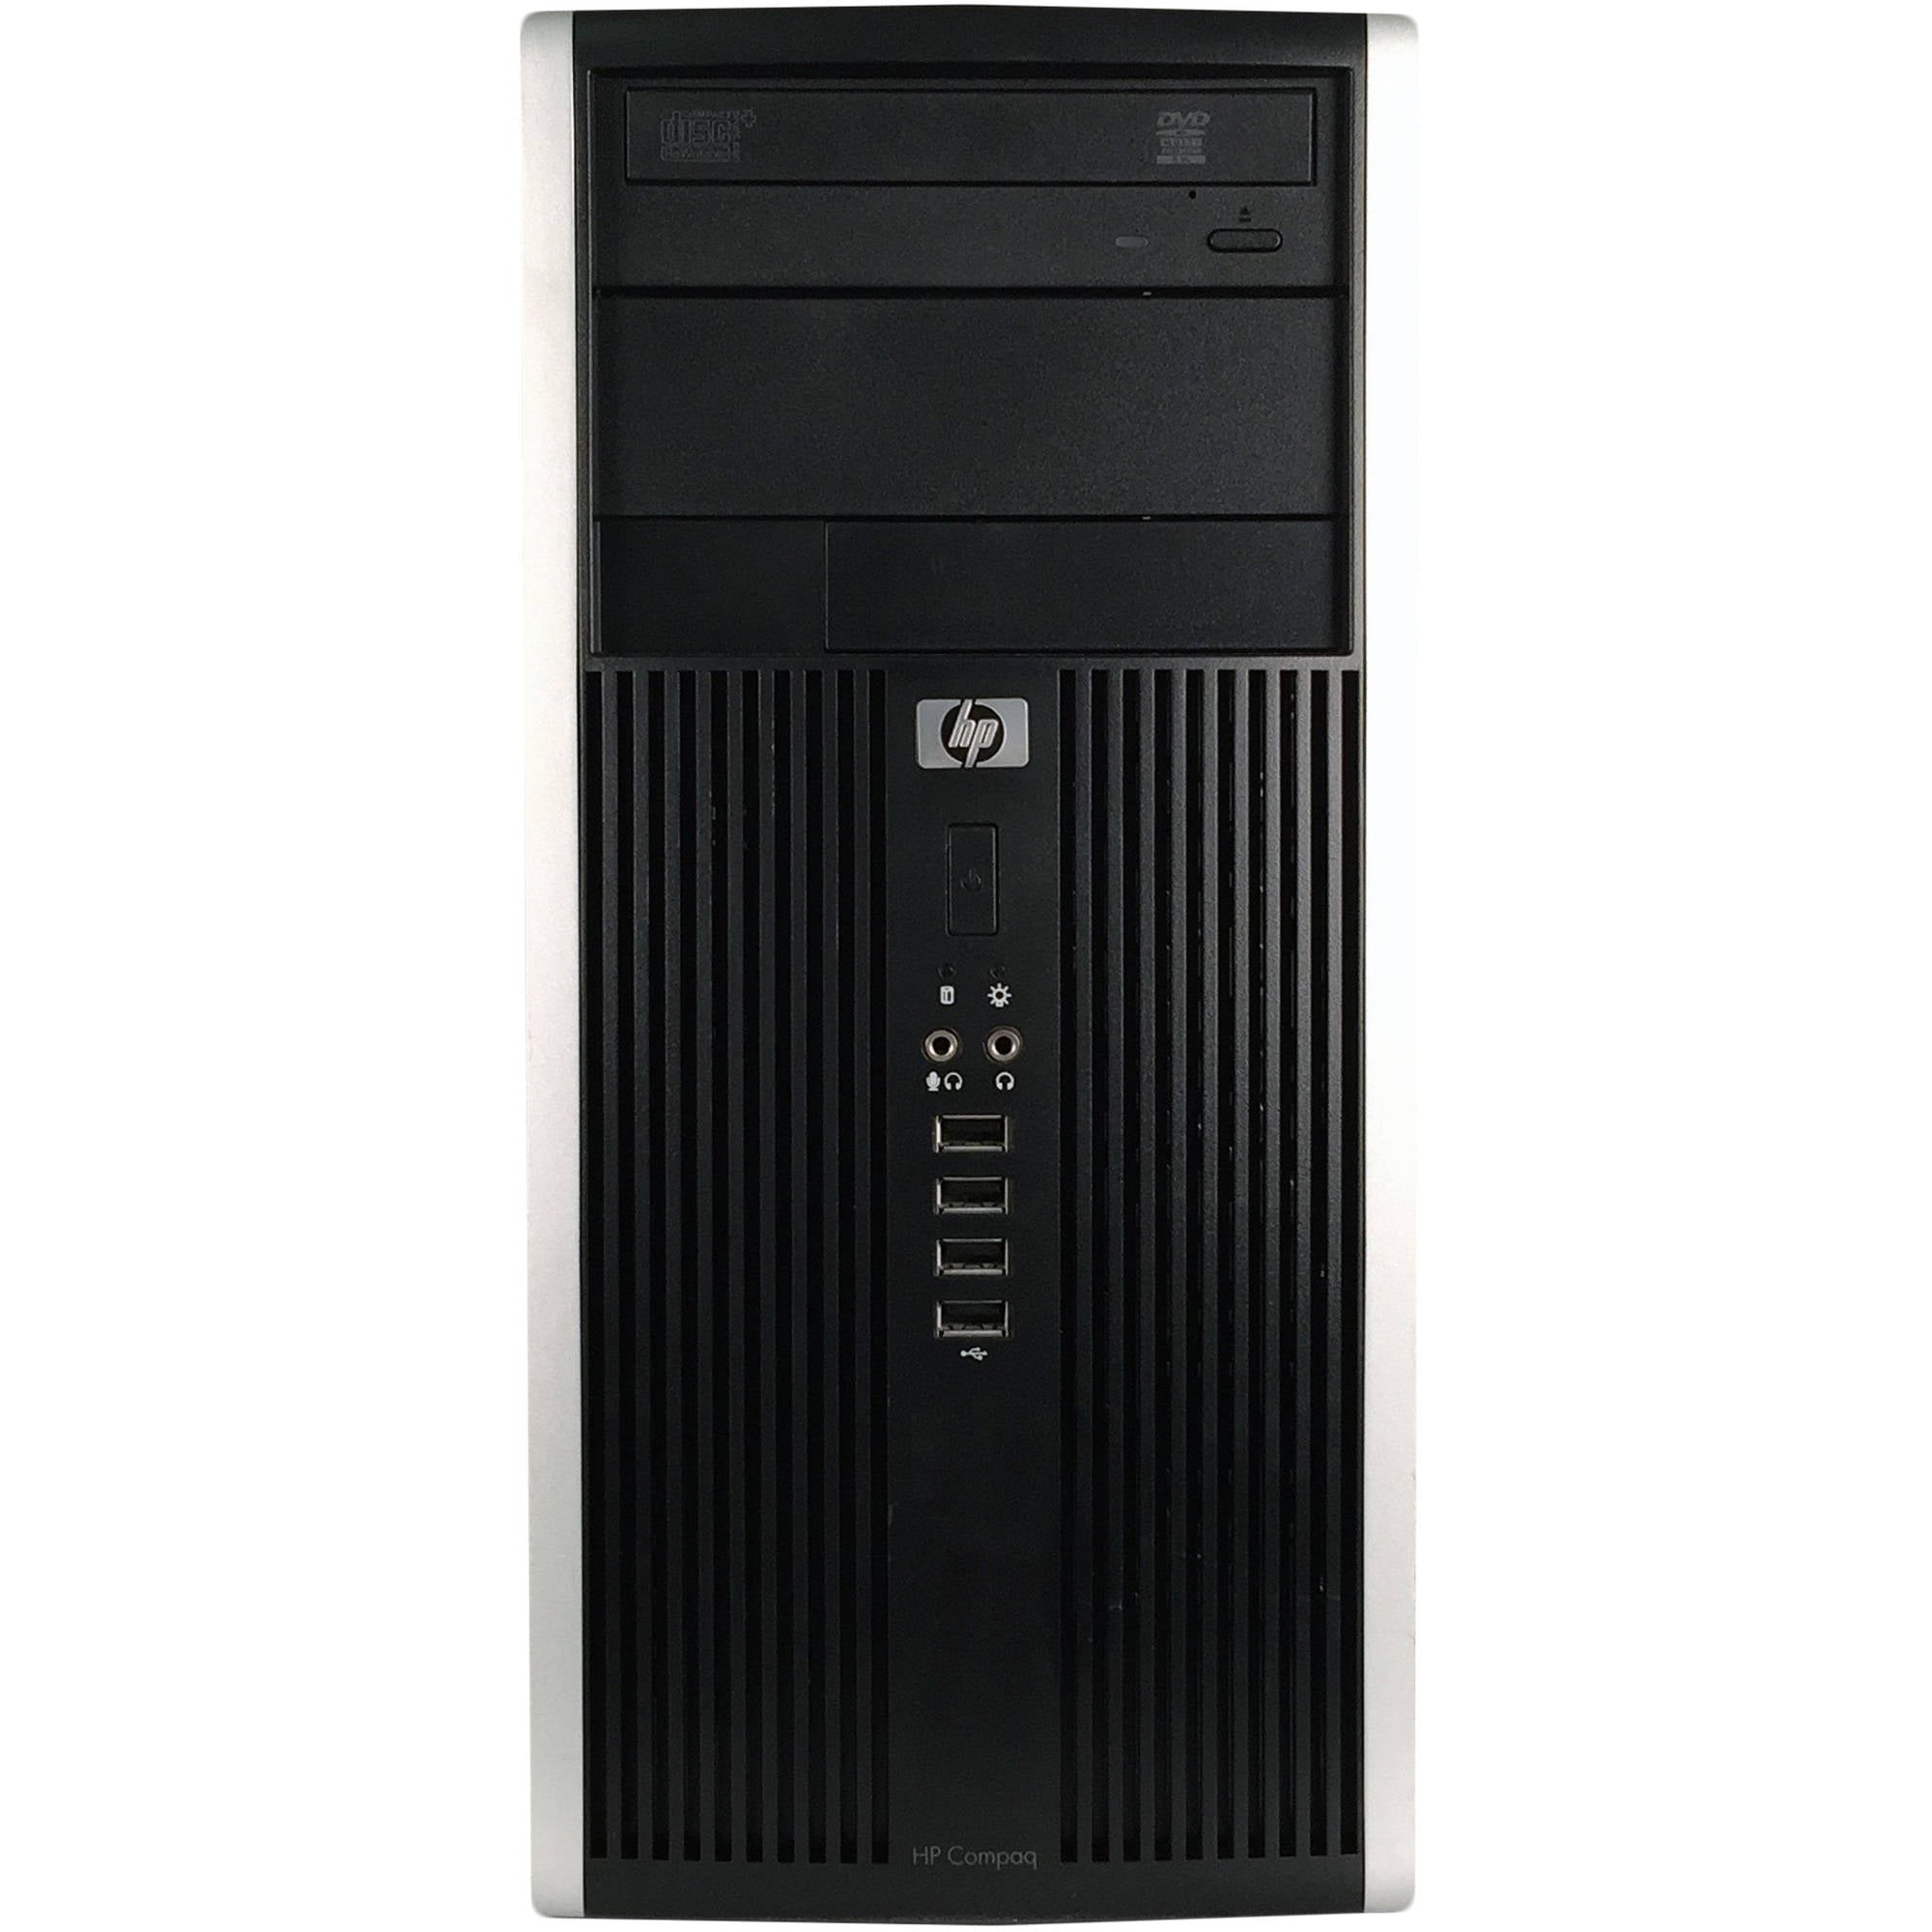 Restored HP Pro 6000 Tower Desktop PC with Intel Core 2 Duo E8400  Processor, 8GB Memory, 320GB Hard Drive and Windows 10 Pro (Monitor Not  Included)